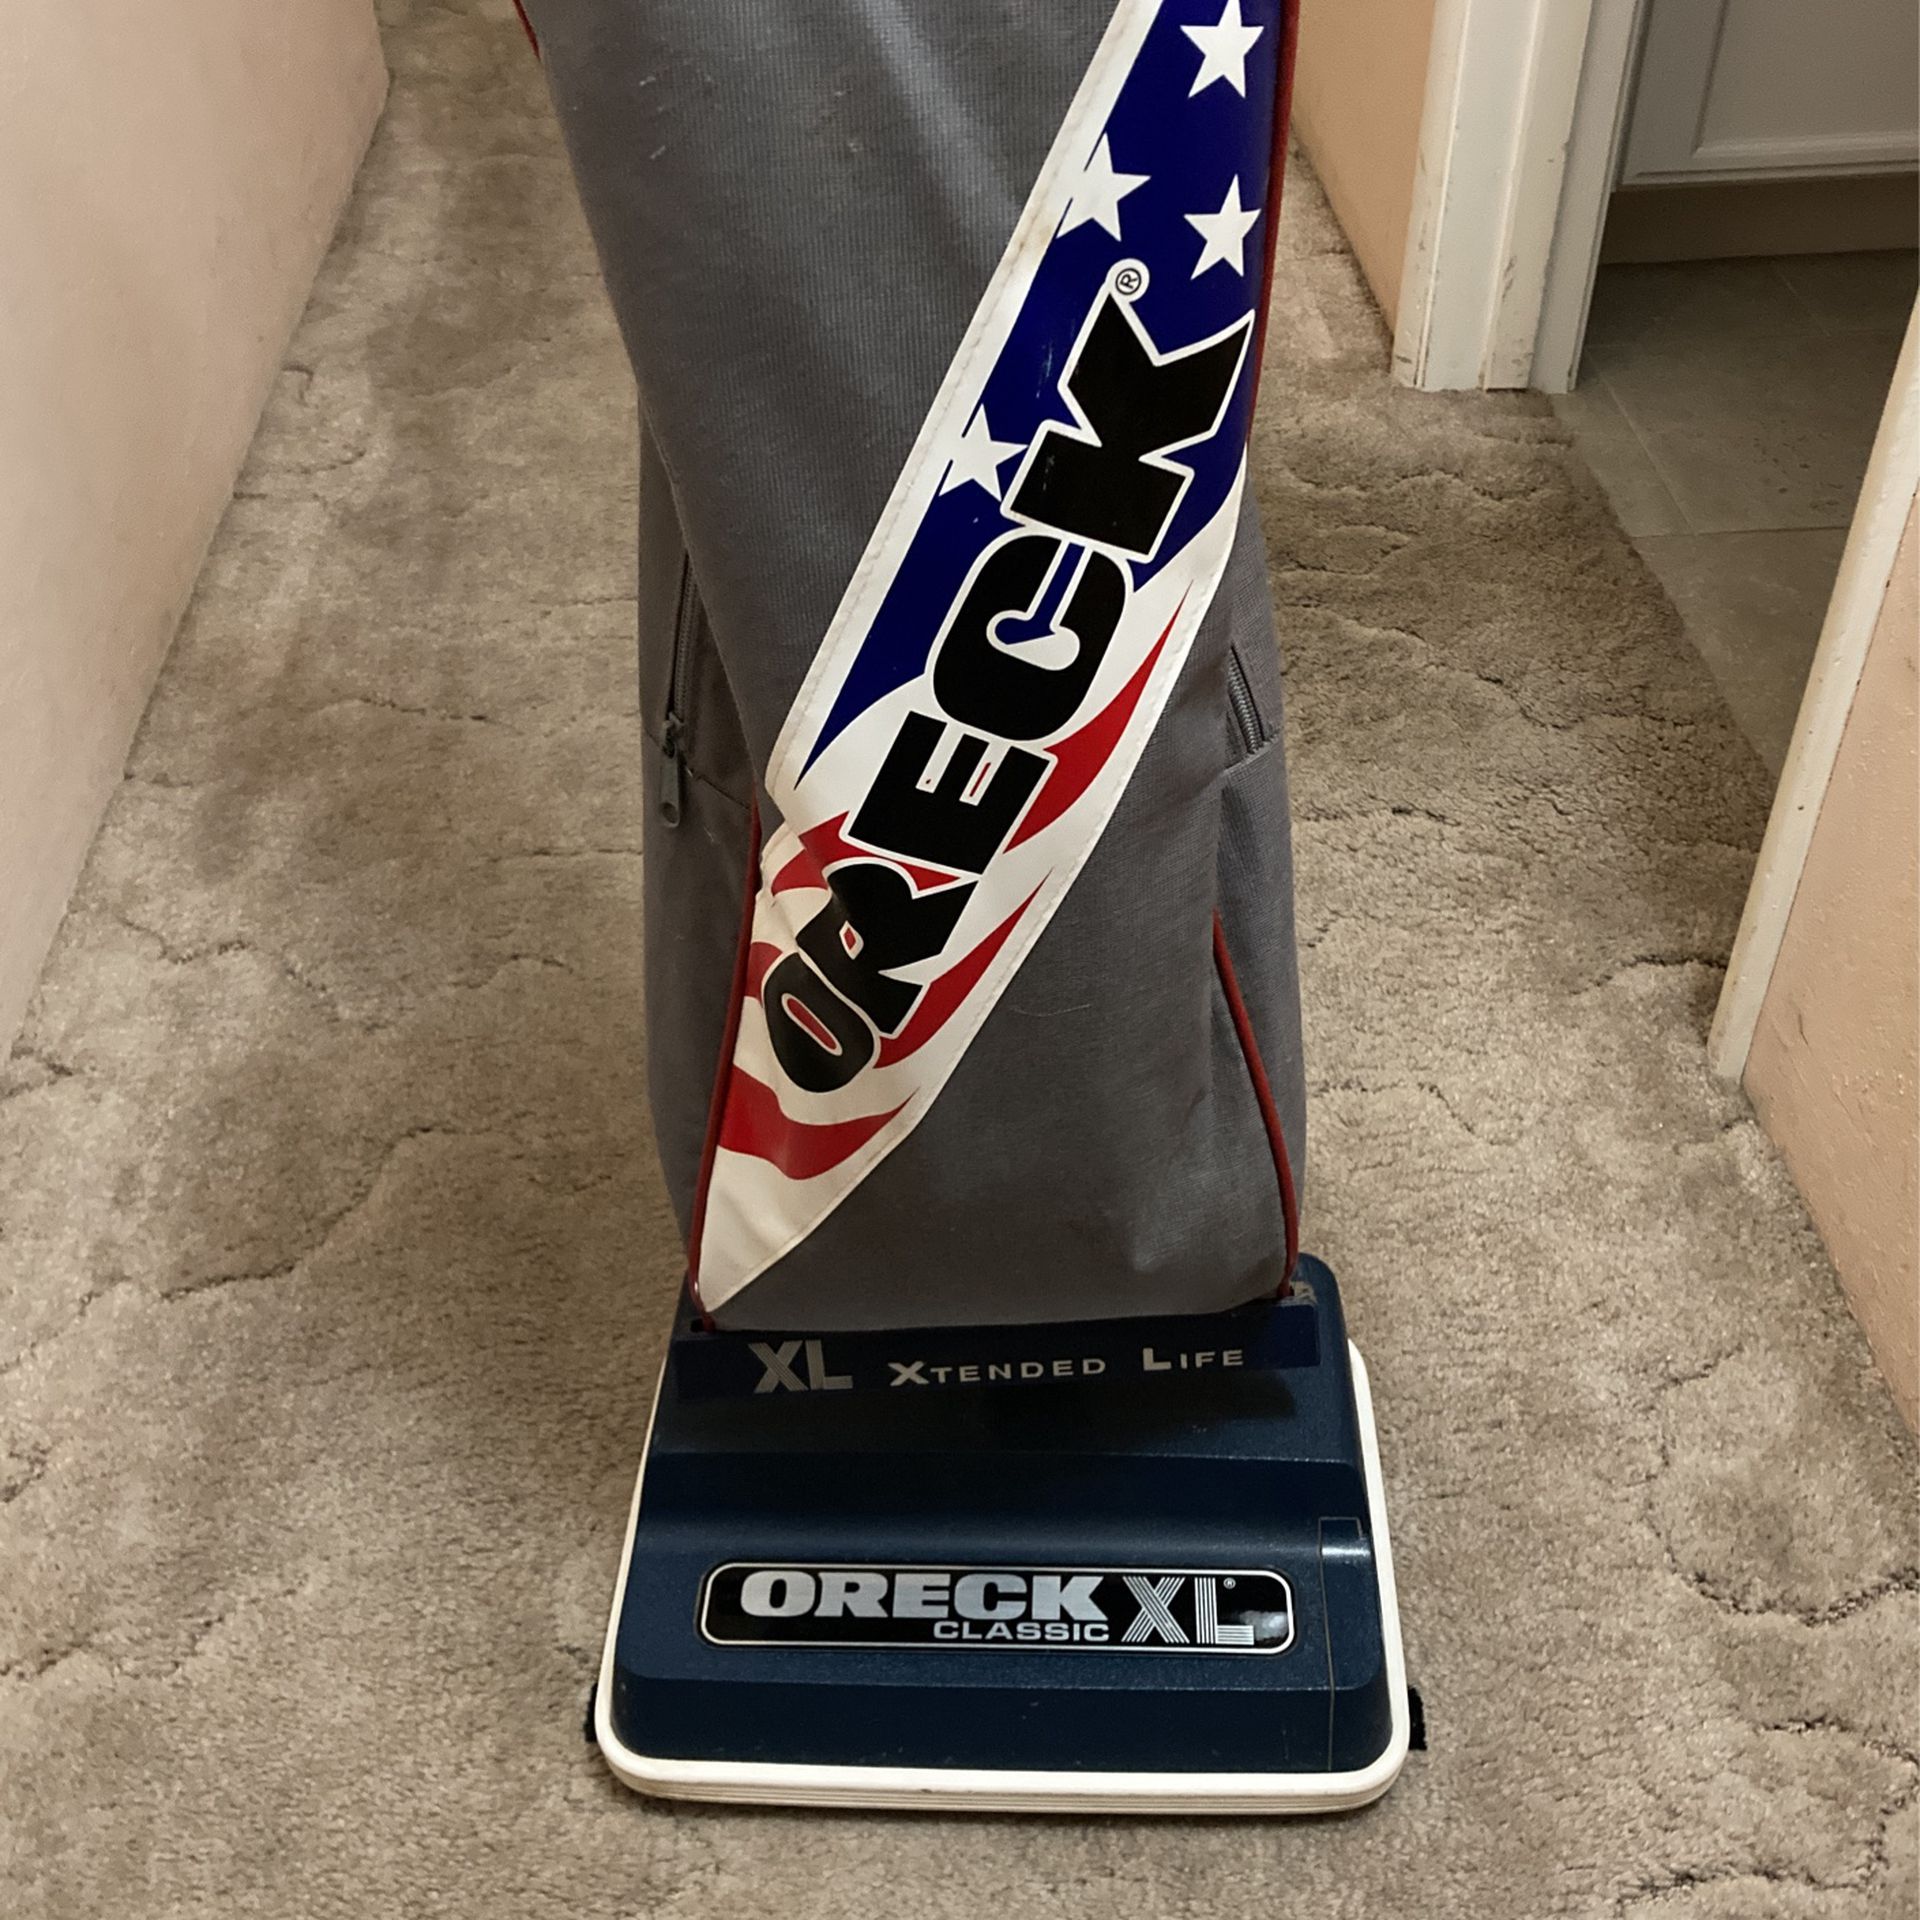 Oreck XL Classic Xtended Life Vacuum Cleaner with bag